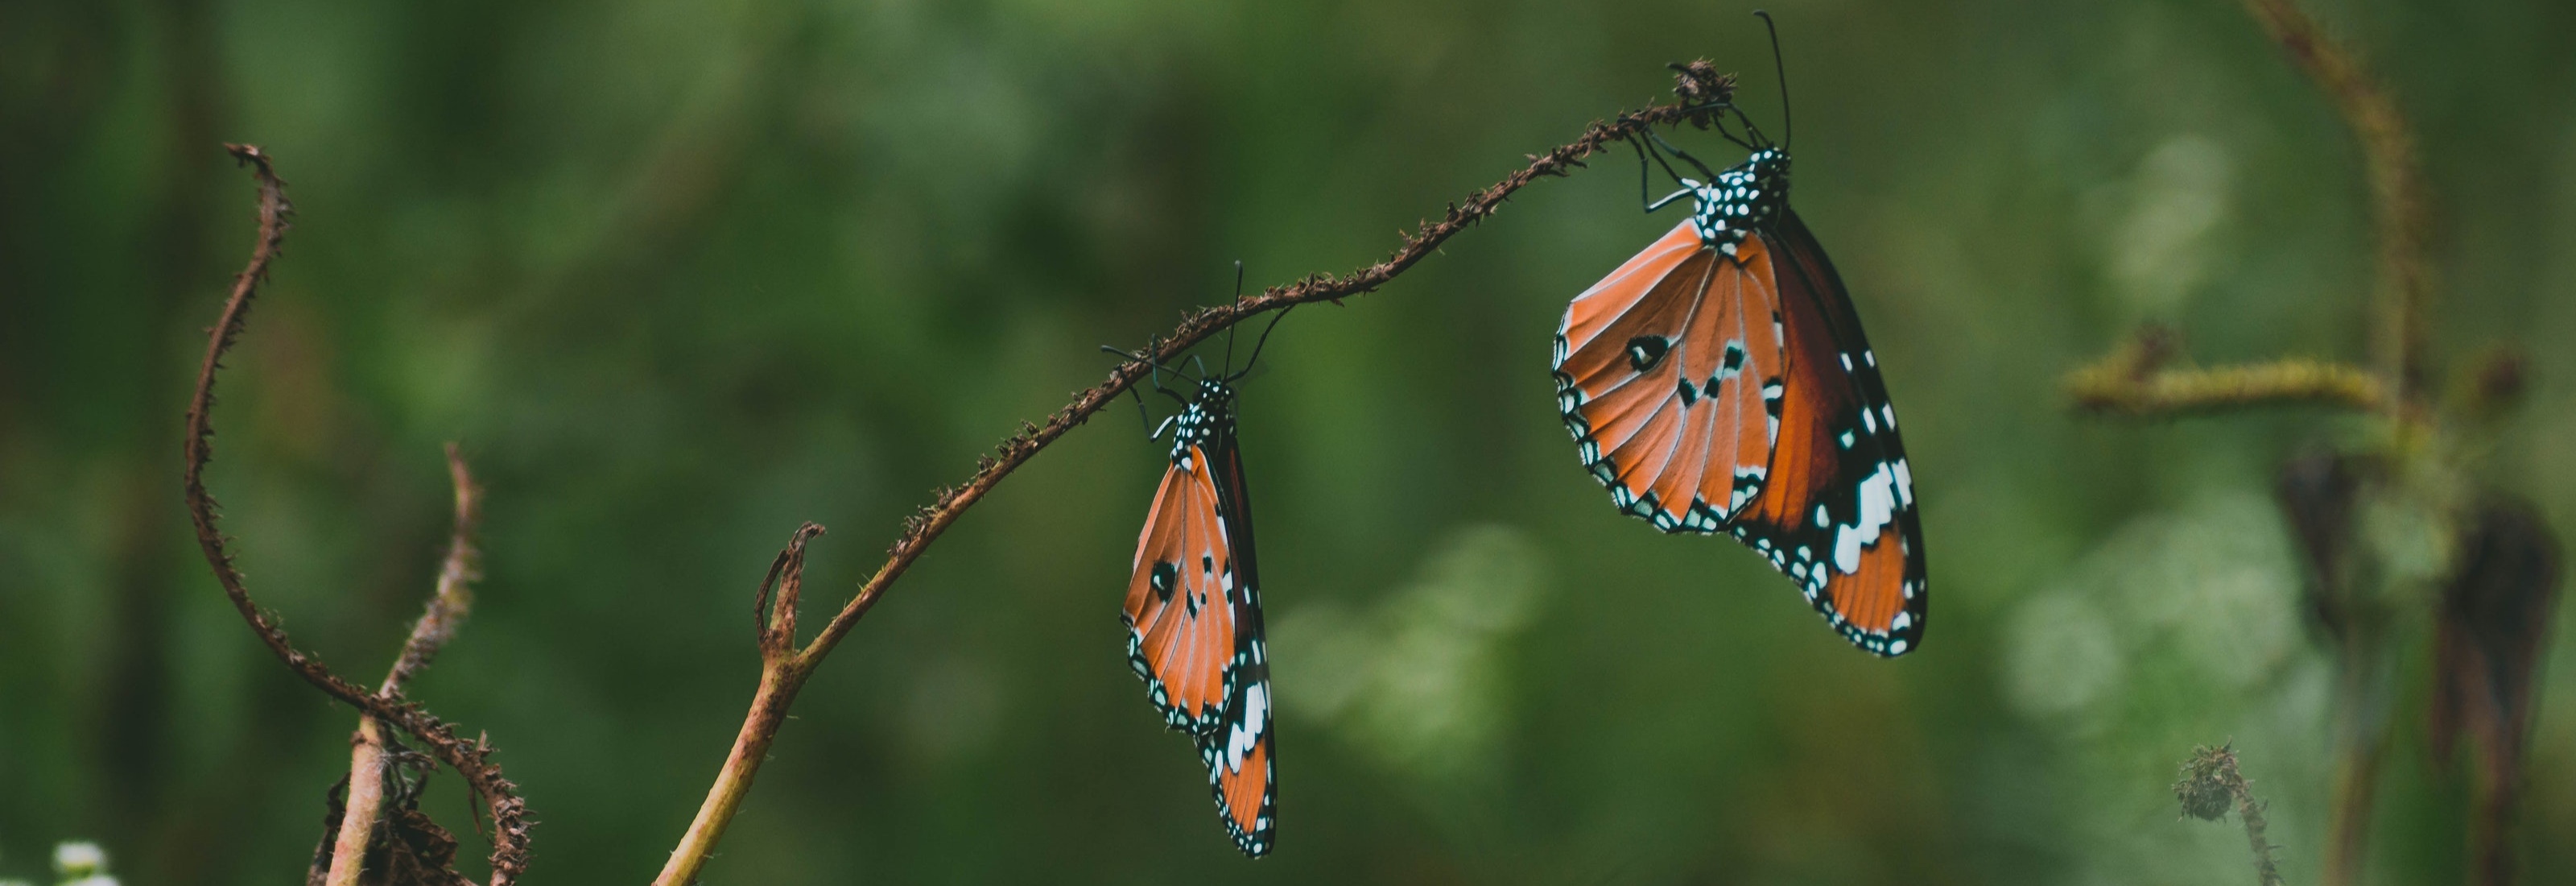 Where to view monarchs in the Bay Area